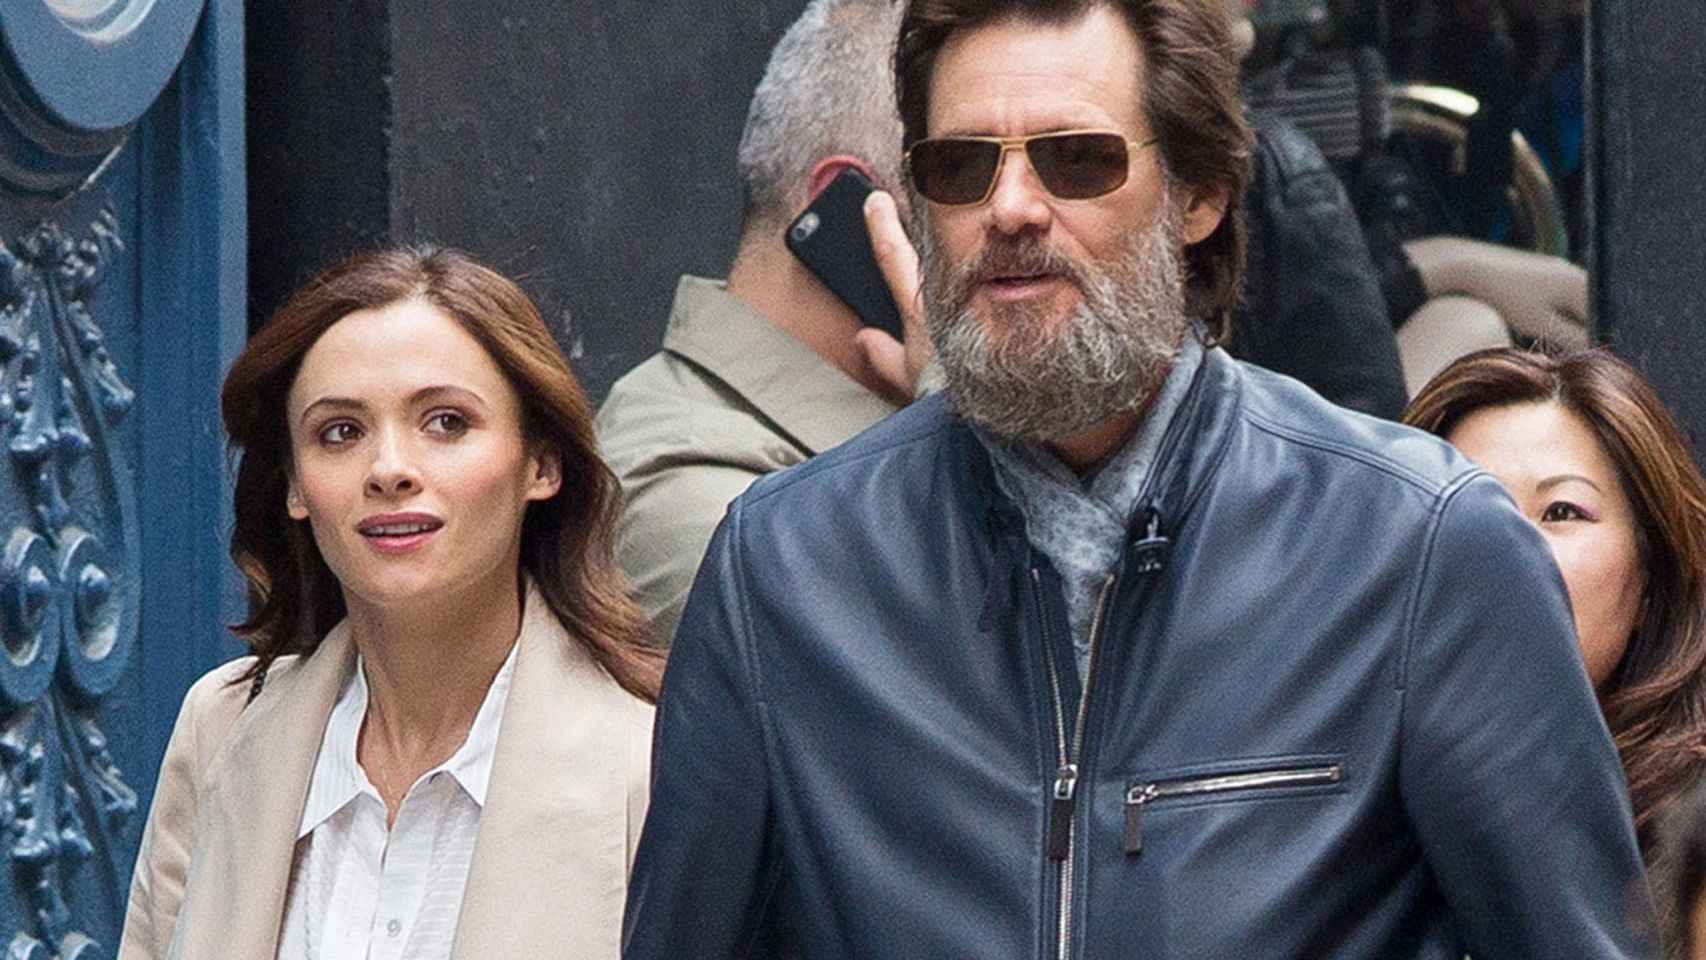 Jim Carrey y Cathriona White.